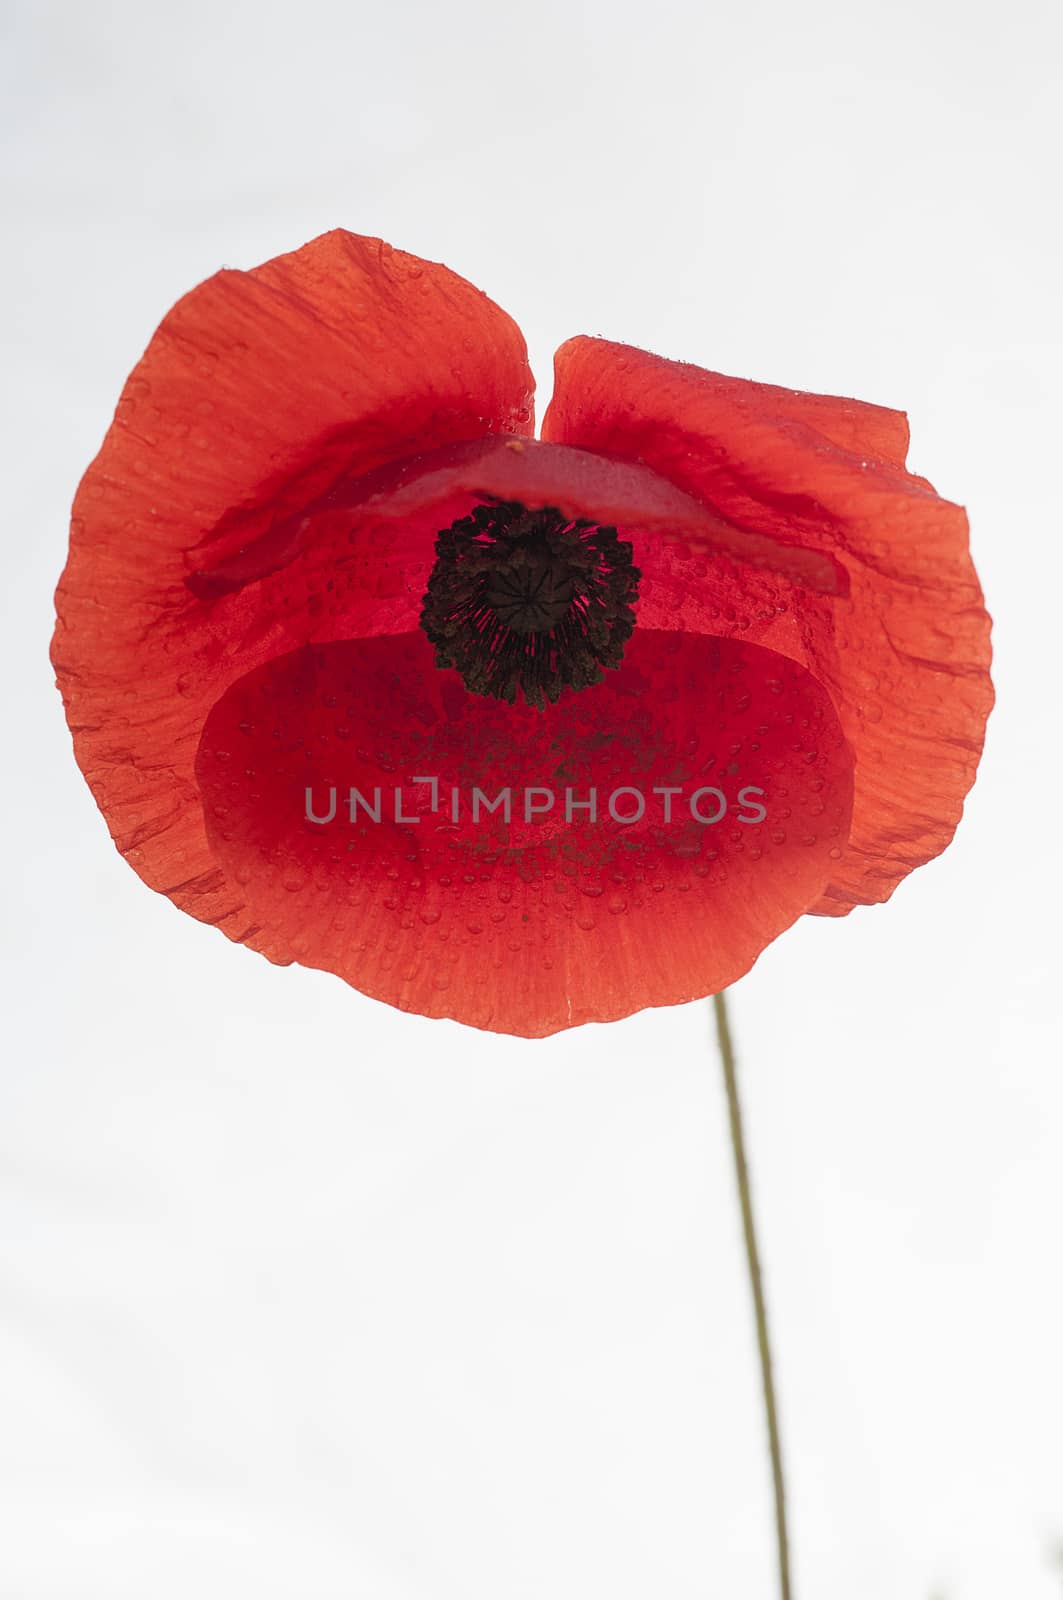 Red poppy flower with white background (Papaver rhoeas)